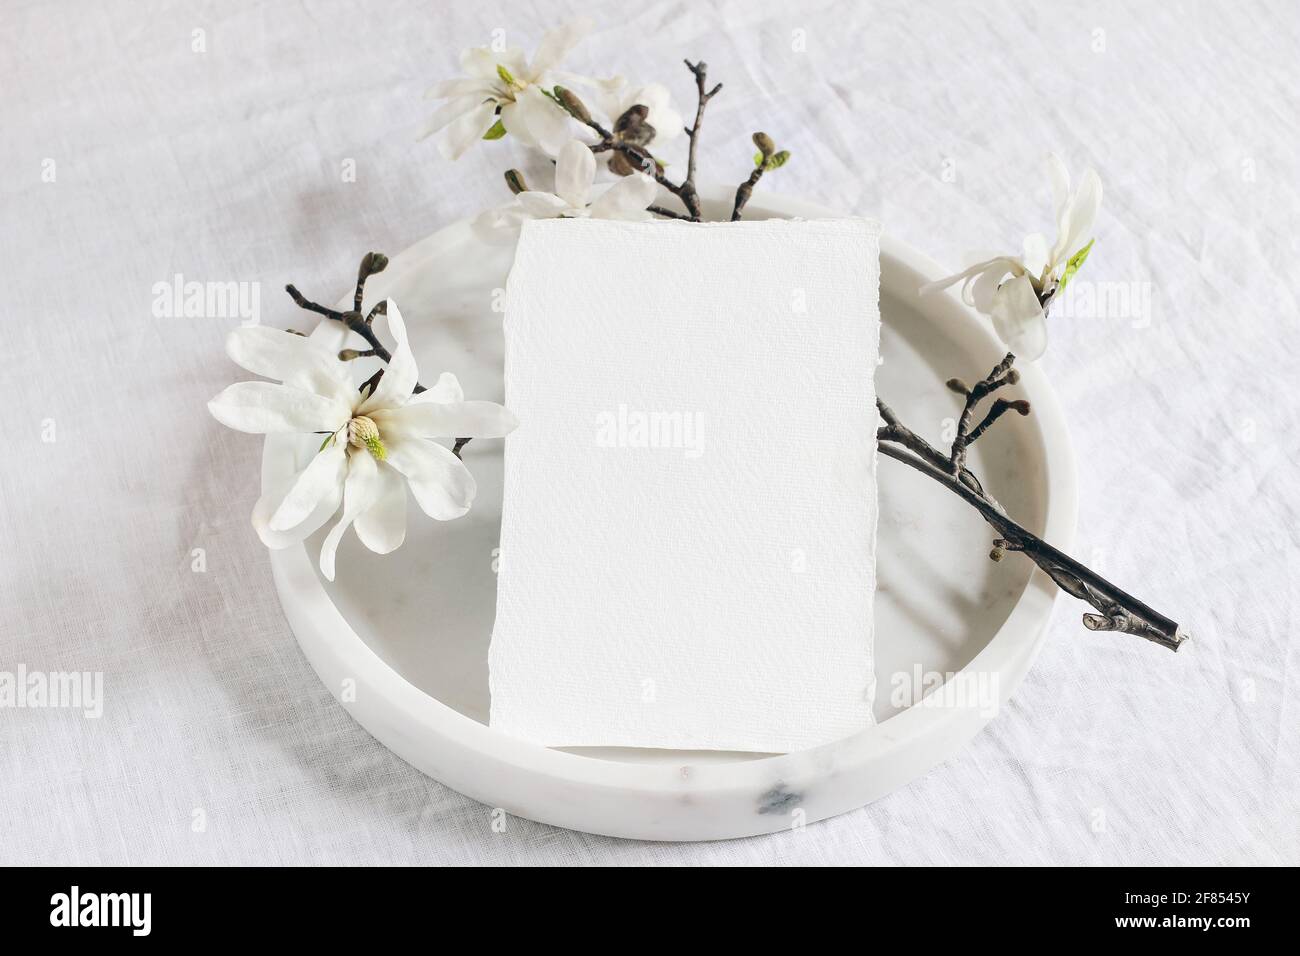 Wedding stationery mock-up scene. Blank vertical greeting card on marble tray. White linen tablecloth background with blooming magnolia stellata tree Stock Photo